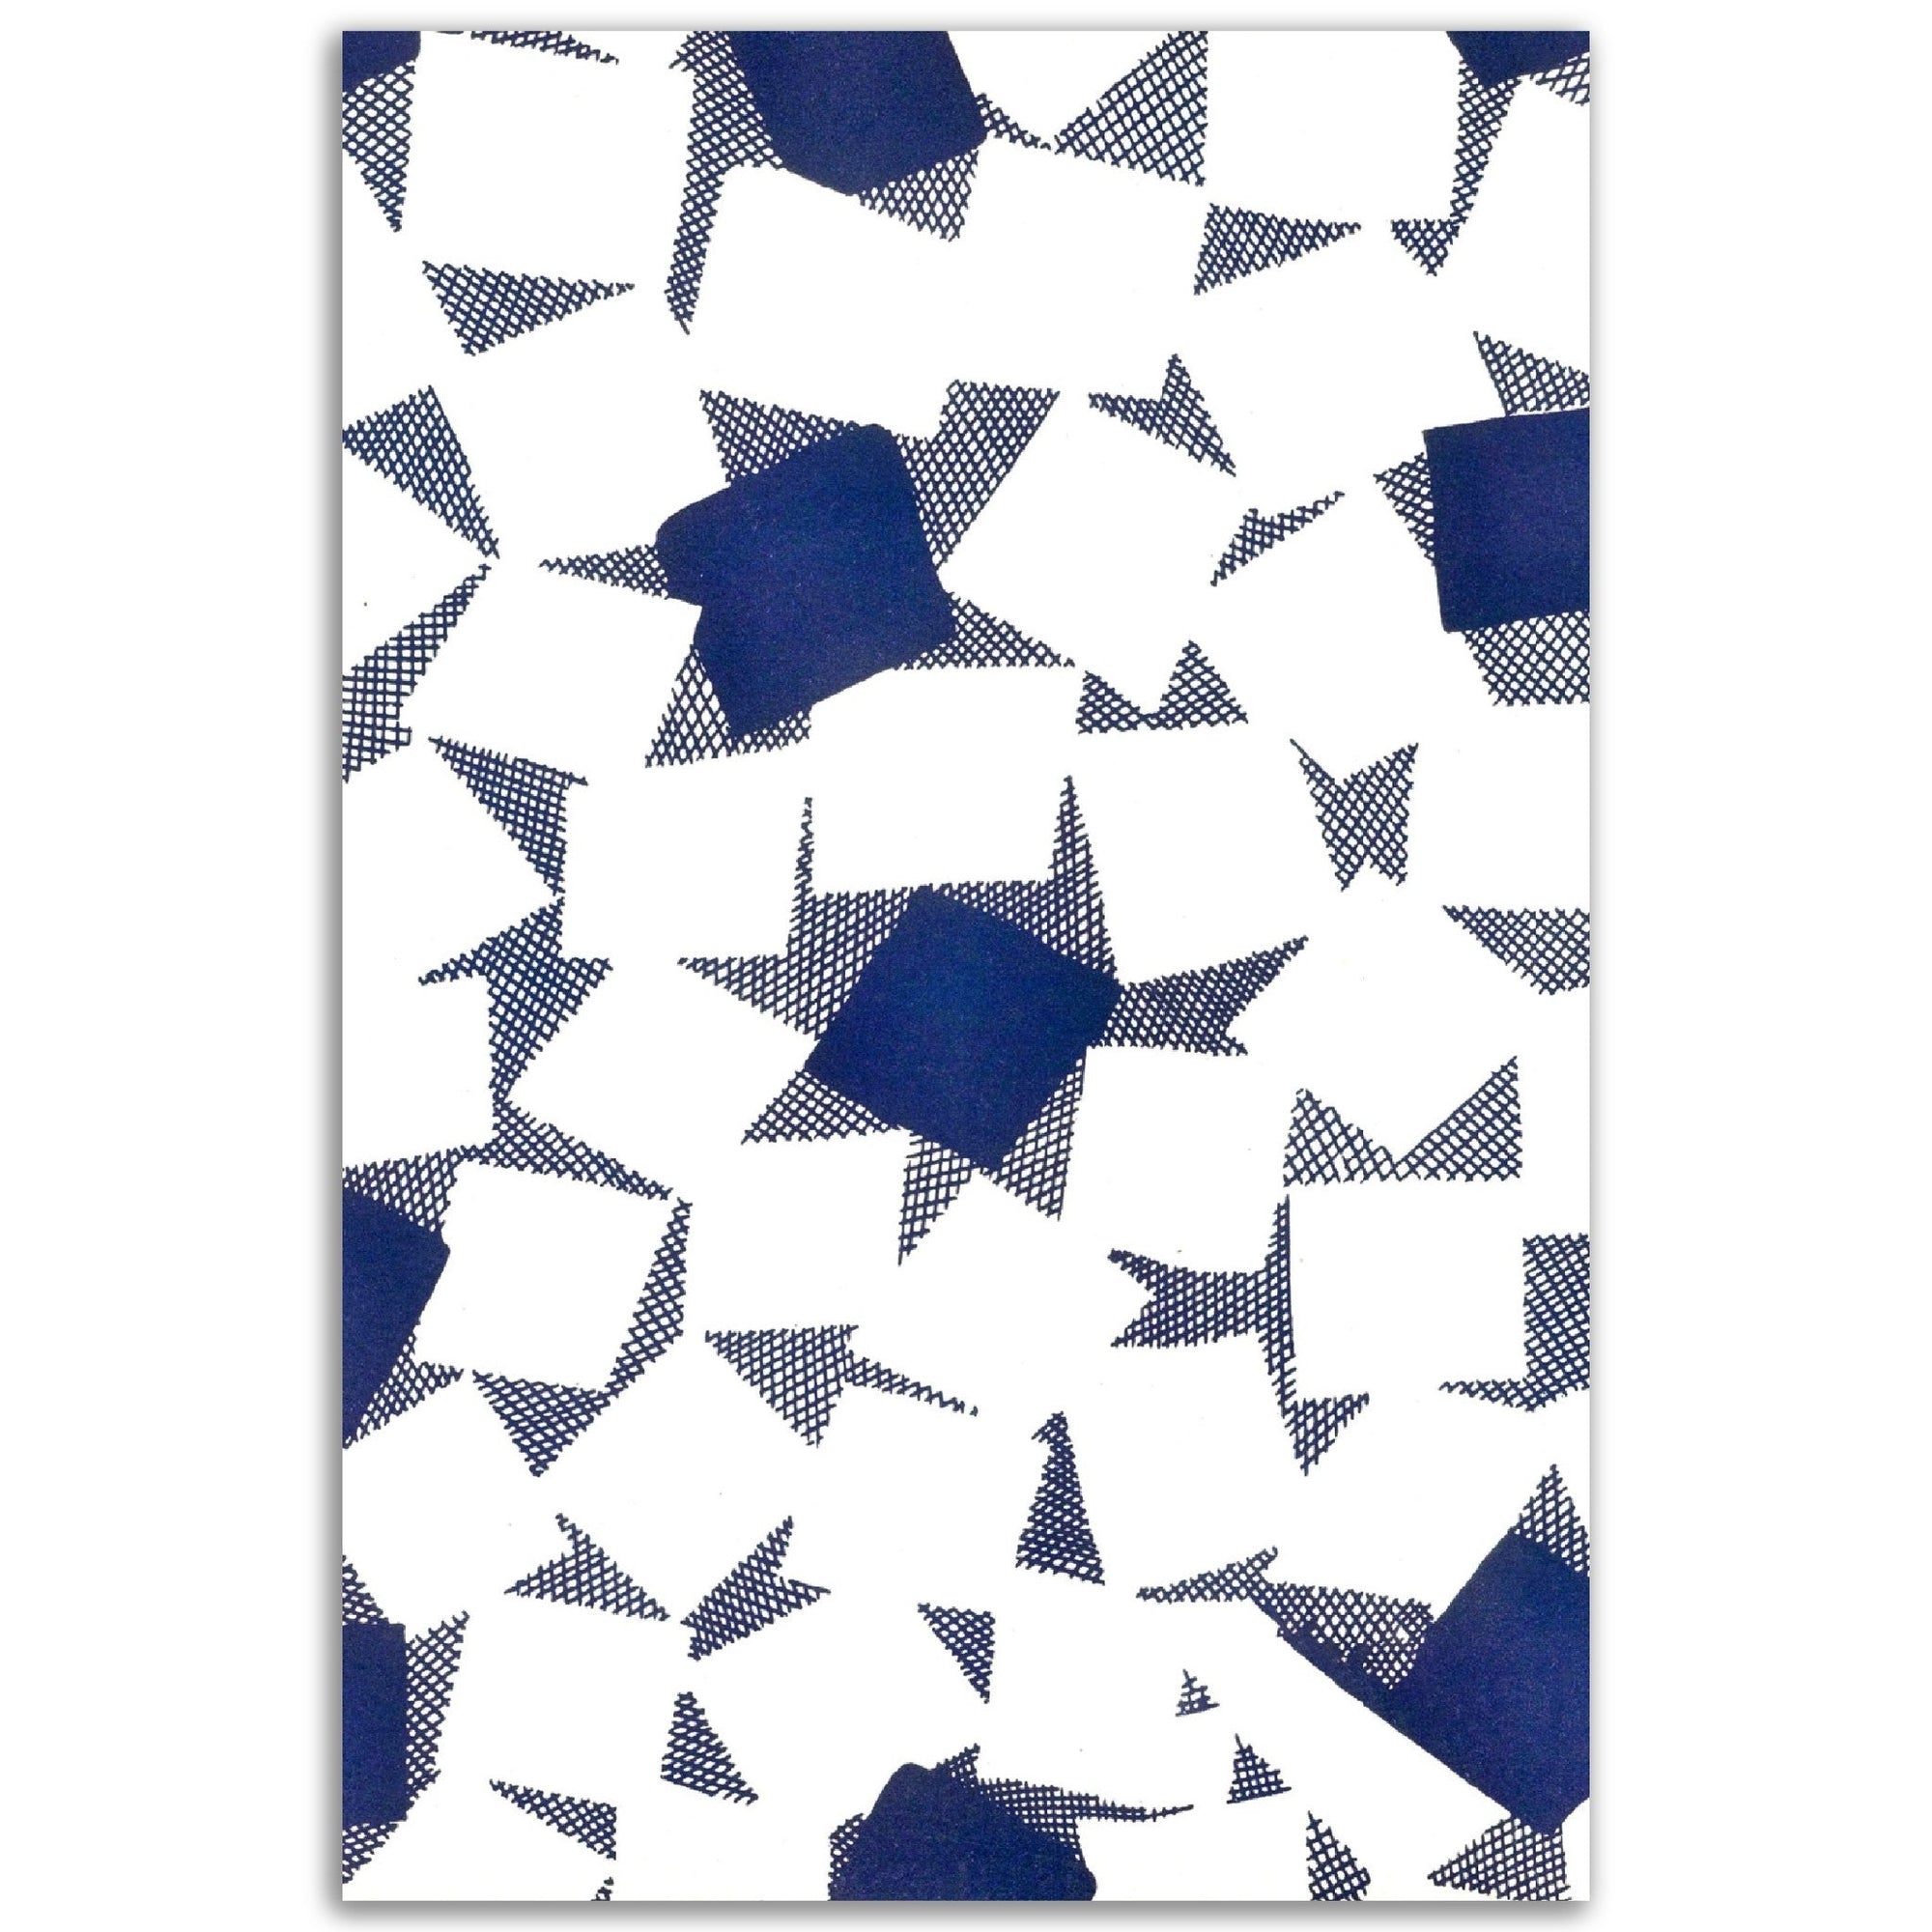 abstract blue and white square designs in pattern with hatchmarks design in background